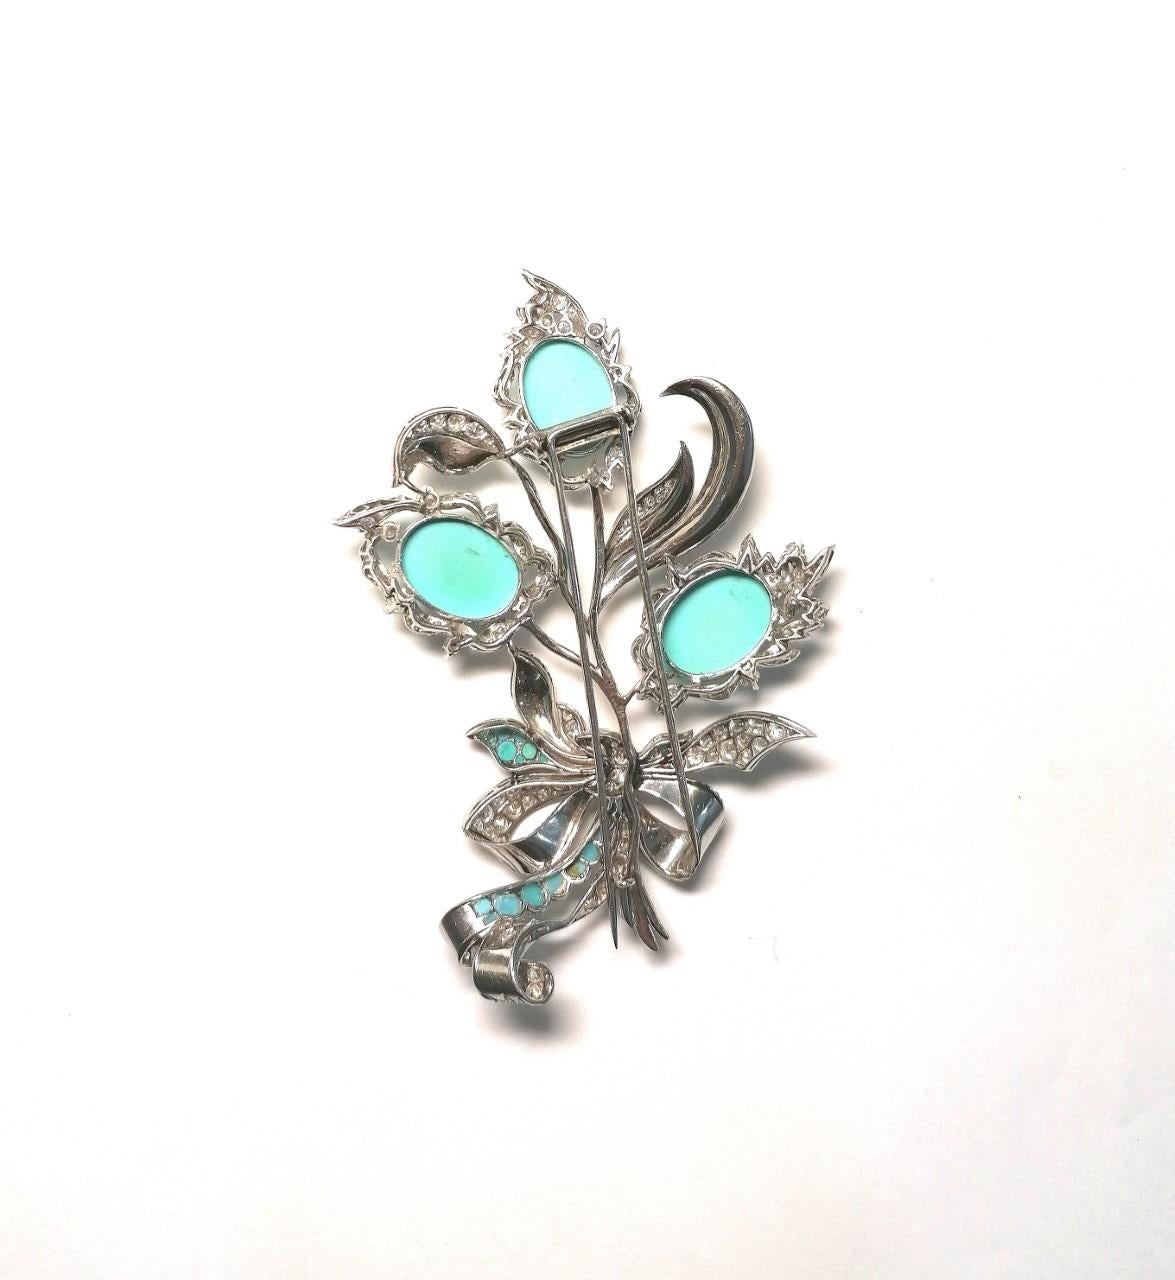 Magnificent vegetal-style platinum brooch with natural turquoise cabochons and brilliant-cut diamonds. Weighing approximately 9 carats. Color and clarity, I - VS2. With two spikes. Total weight    grams.